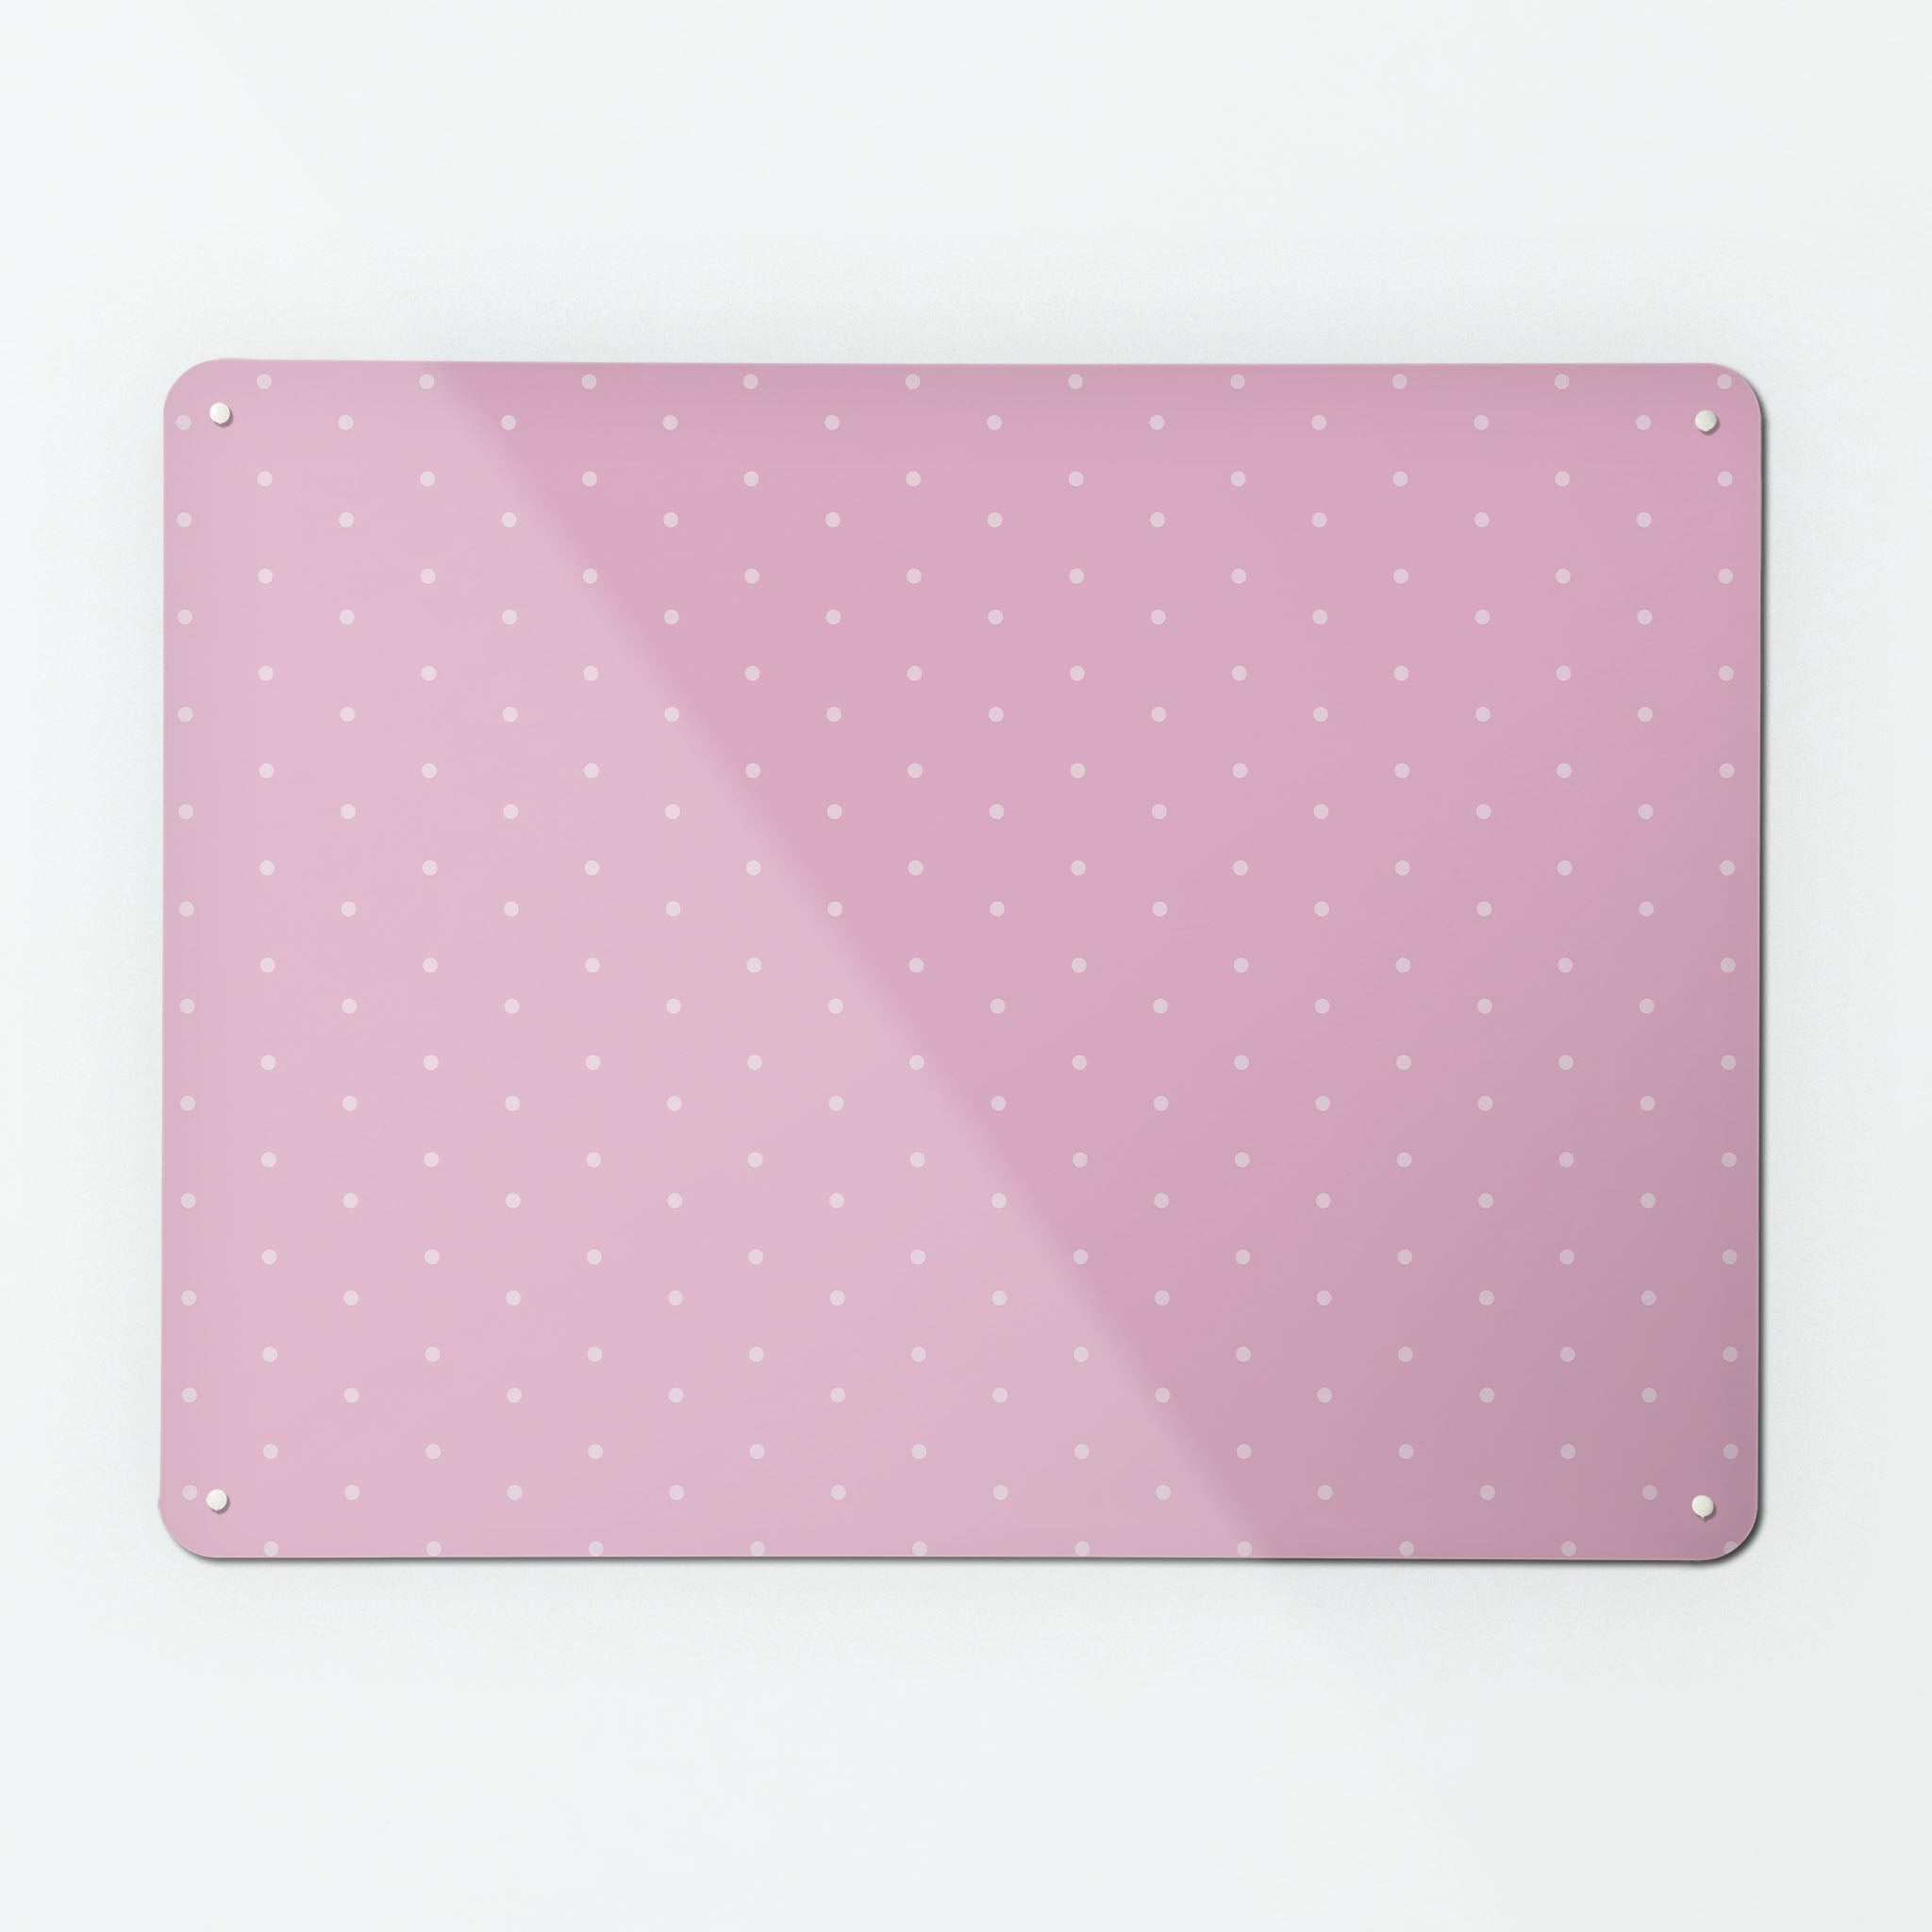 A large magnetic notice board by Beyond the Fridge with a pale pink polkadots on a pink background pattern